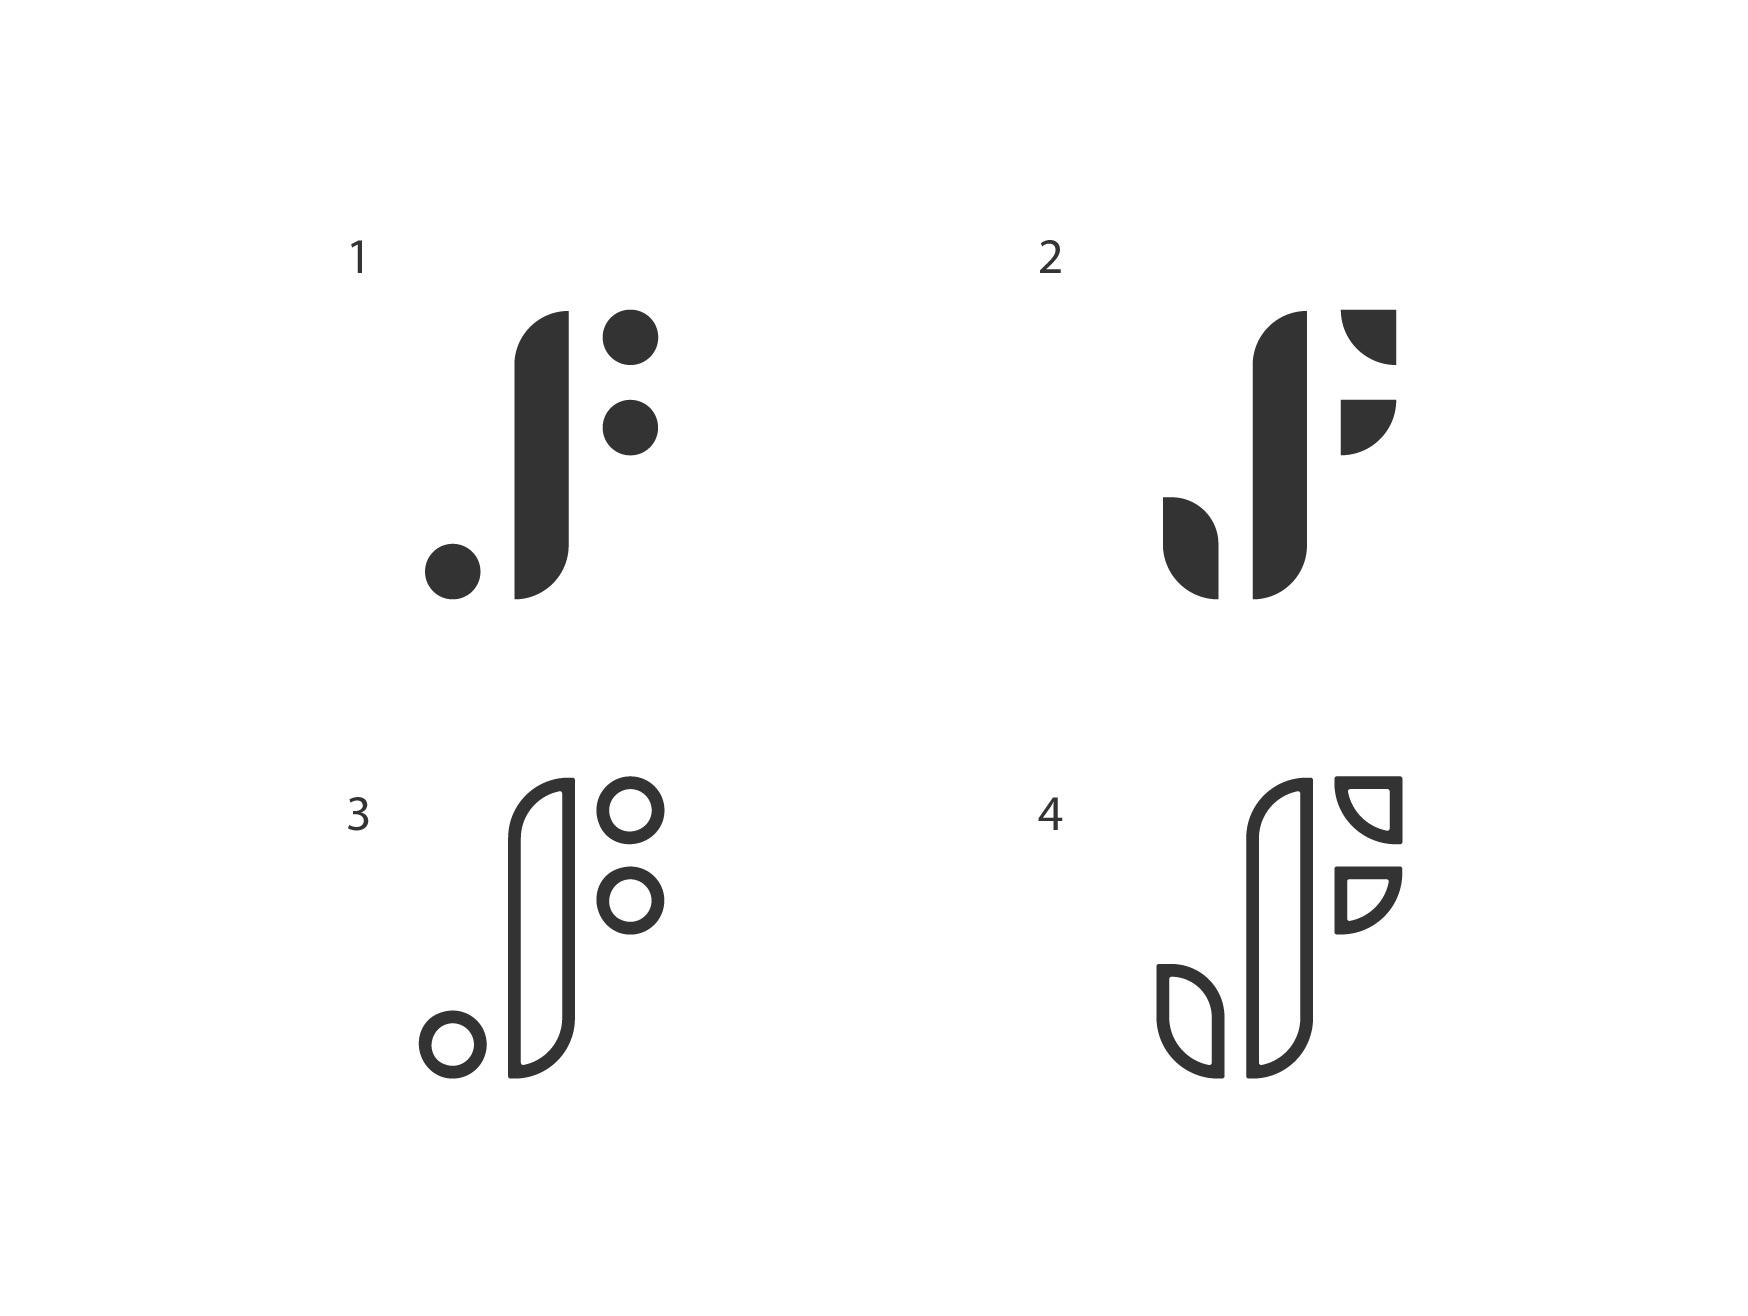 JF Logo - I am working on a personal logo with my Initials “JF” for an ...